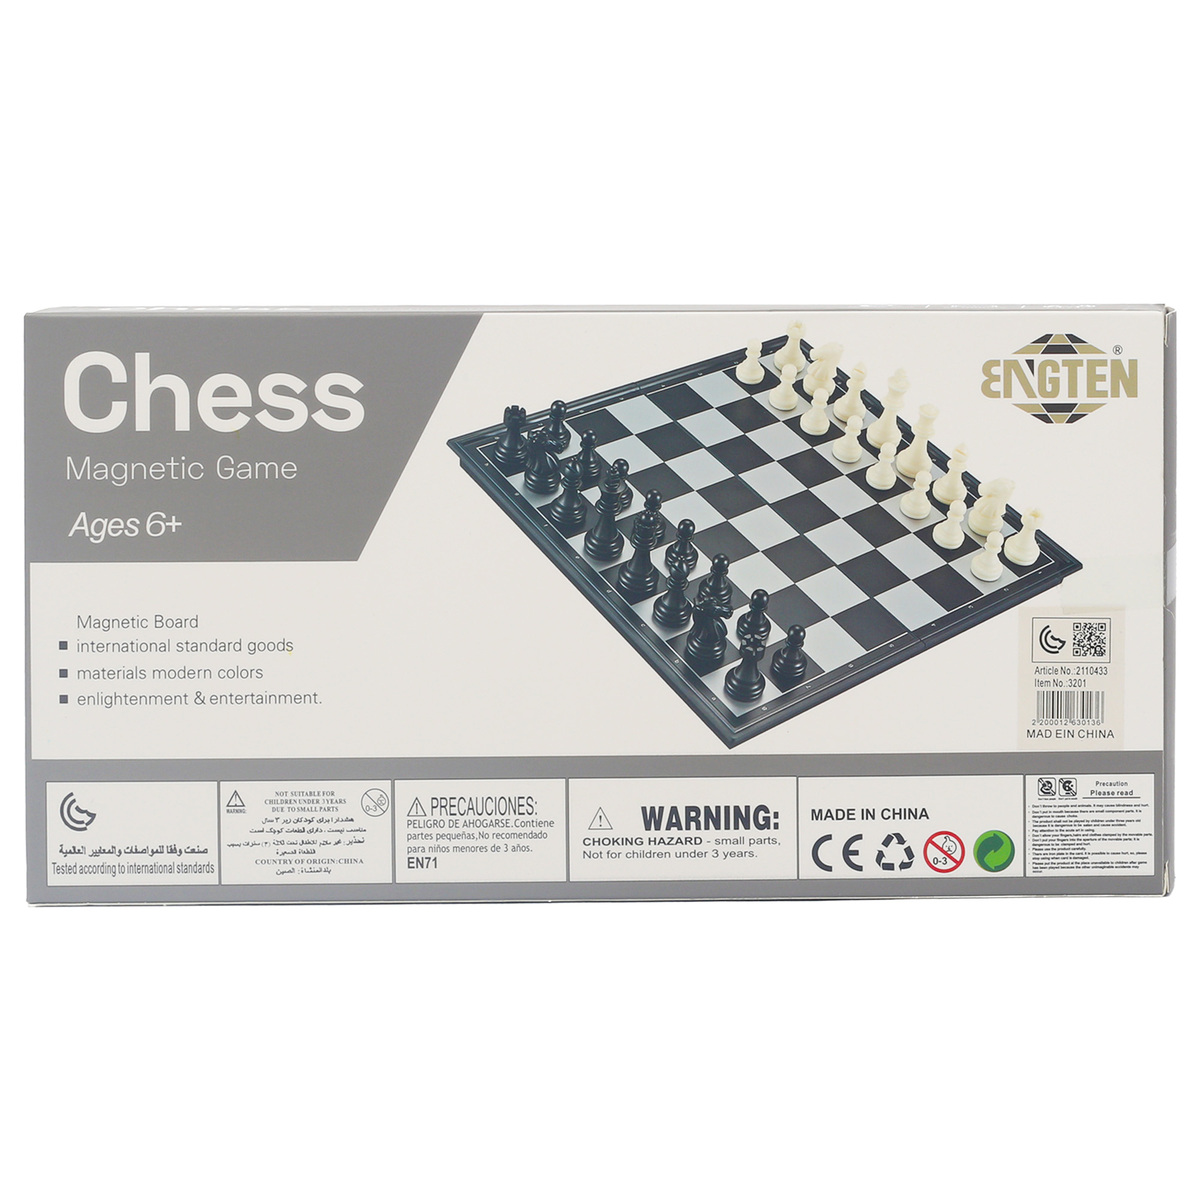 Skid Fusion Magnetic Chess Board Set 3201